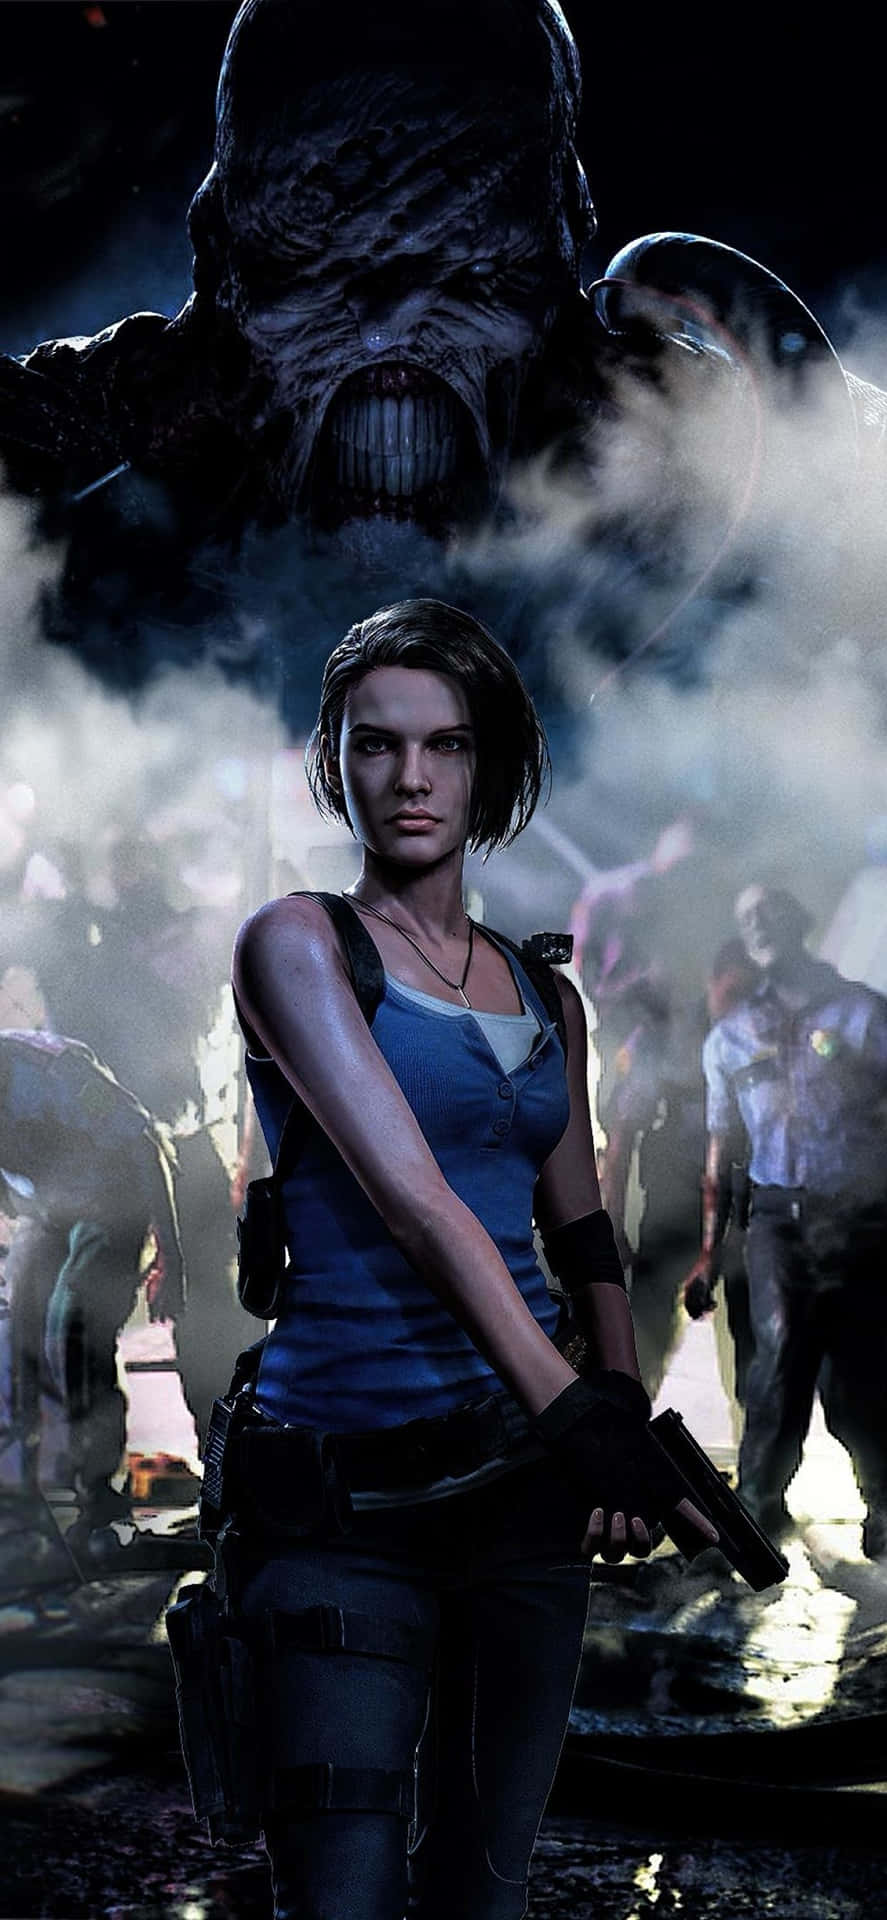 Get Ready for Thrills with the Resident Evil Iphone Wallpaper